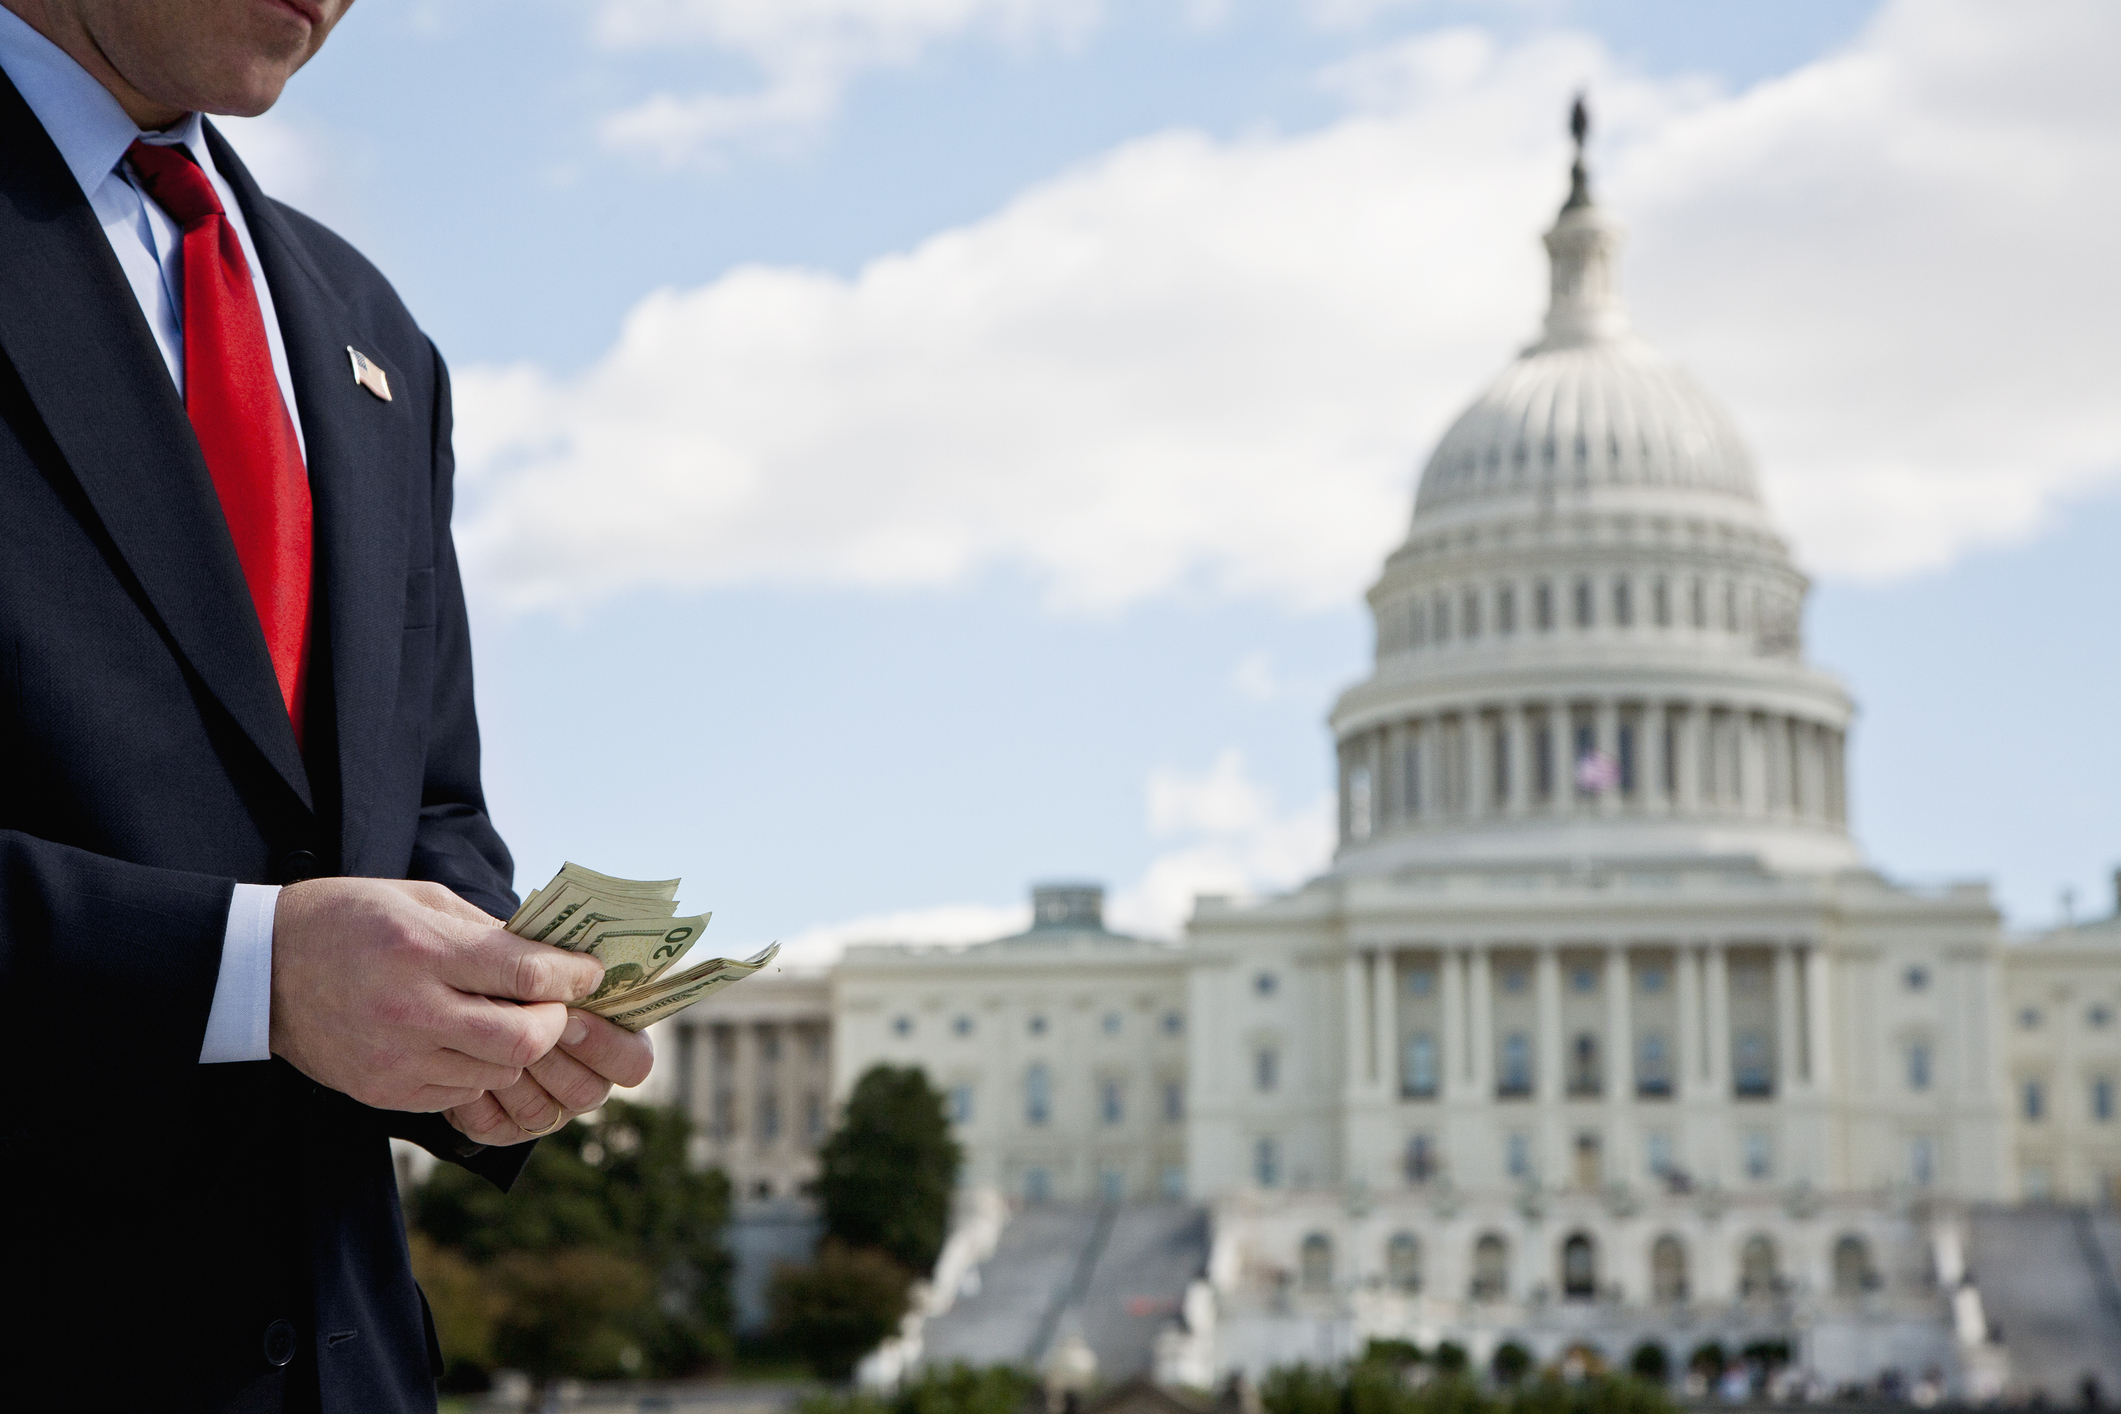 A politician counting money in front of the US Capitol Building